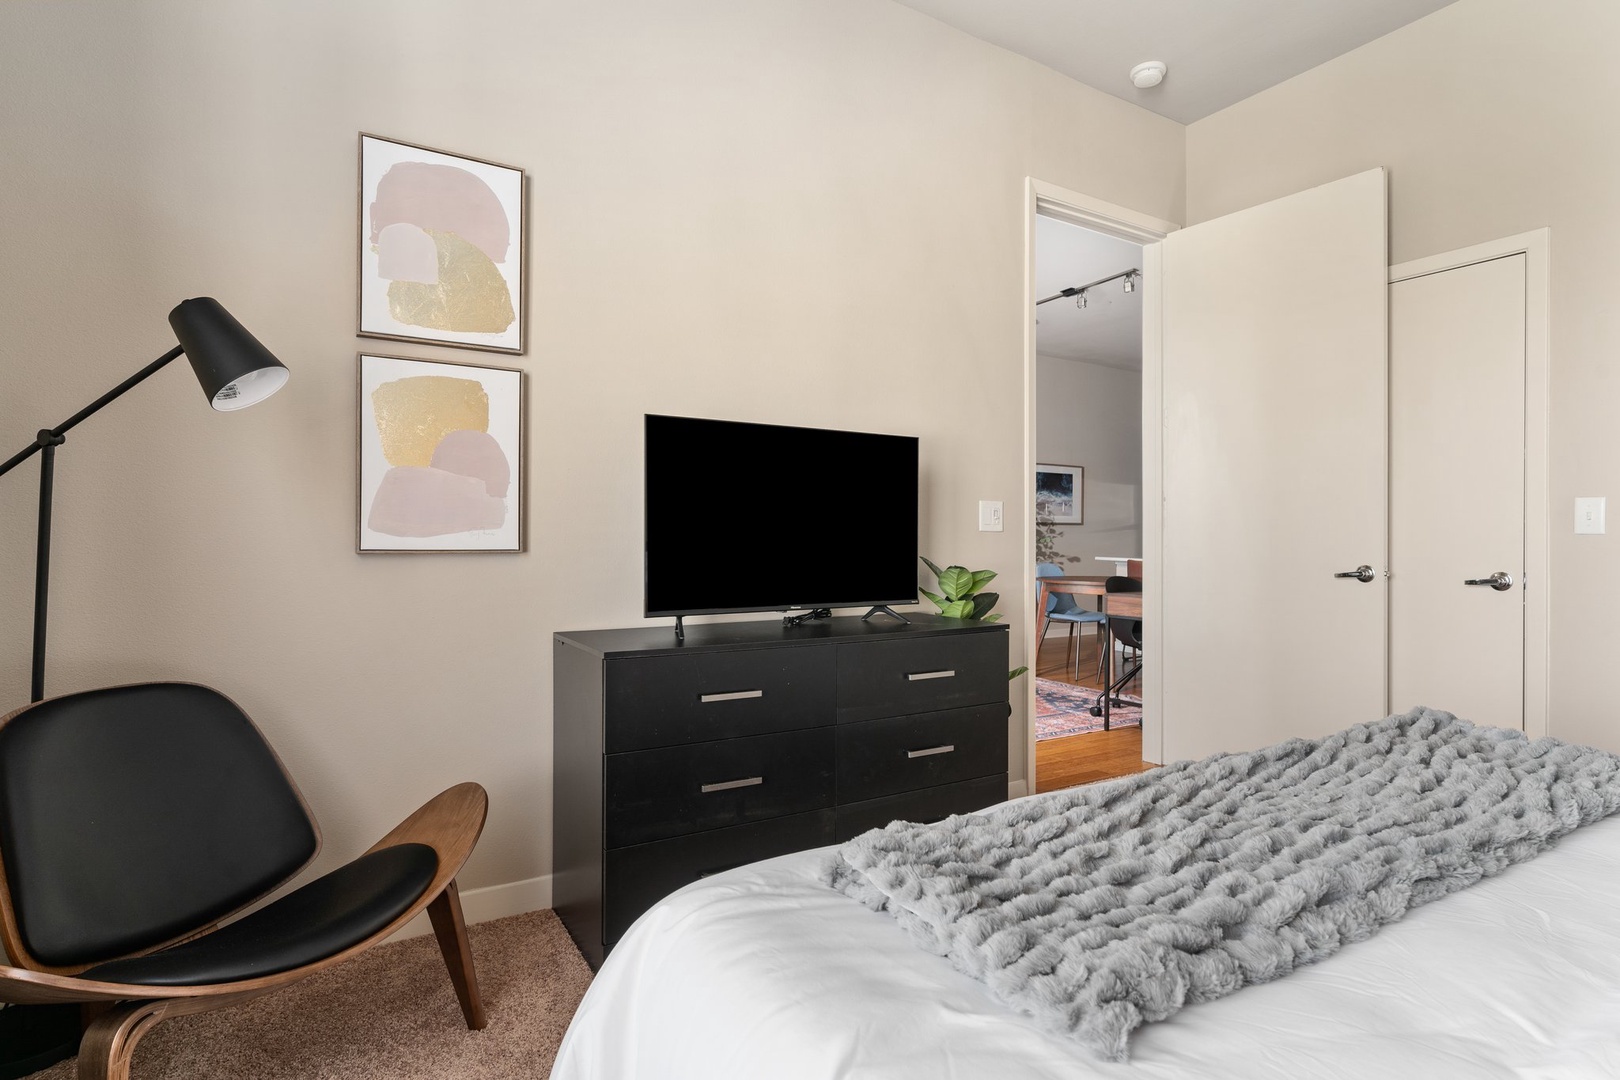 Experience a tranquil rest on a memory foam mattress in this cozy bedroom equipped with a  smart TV.